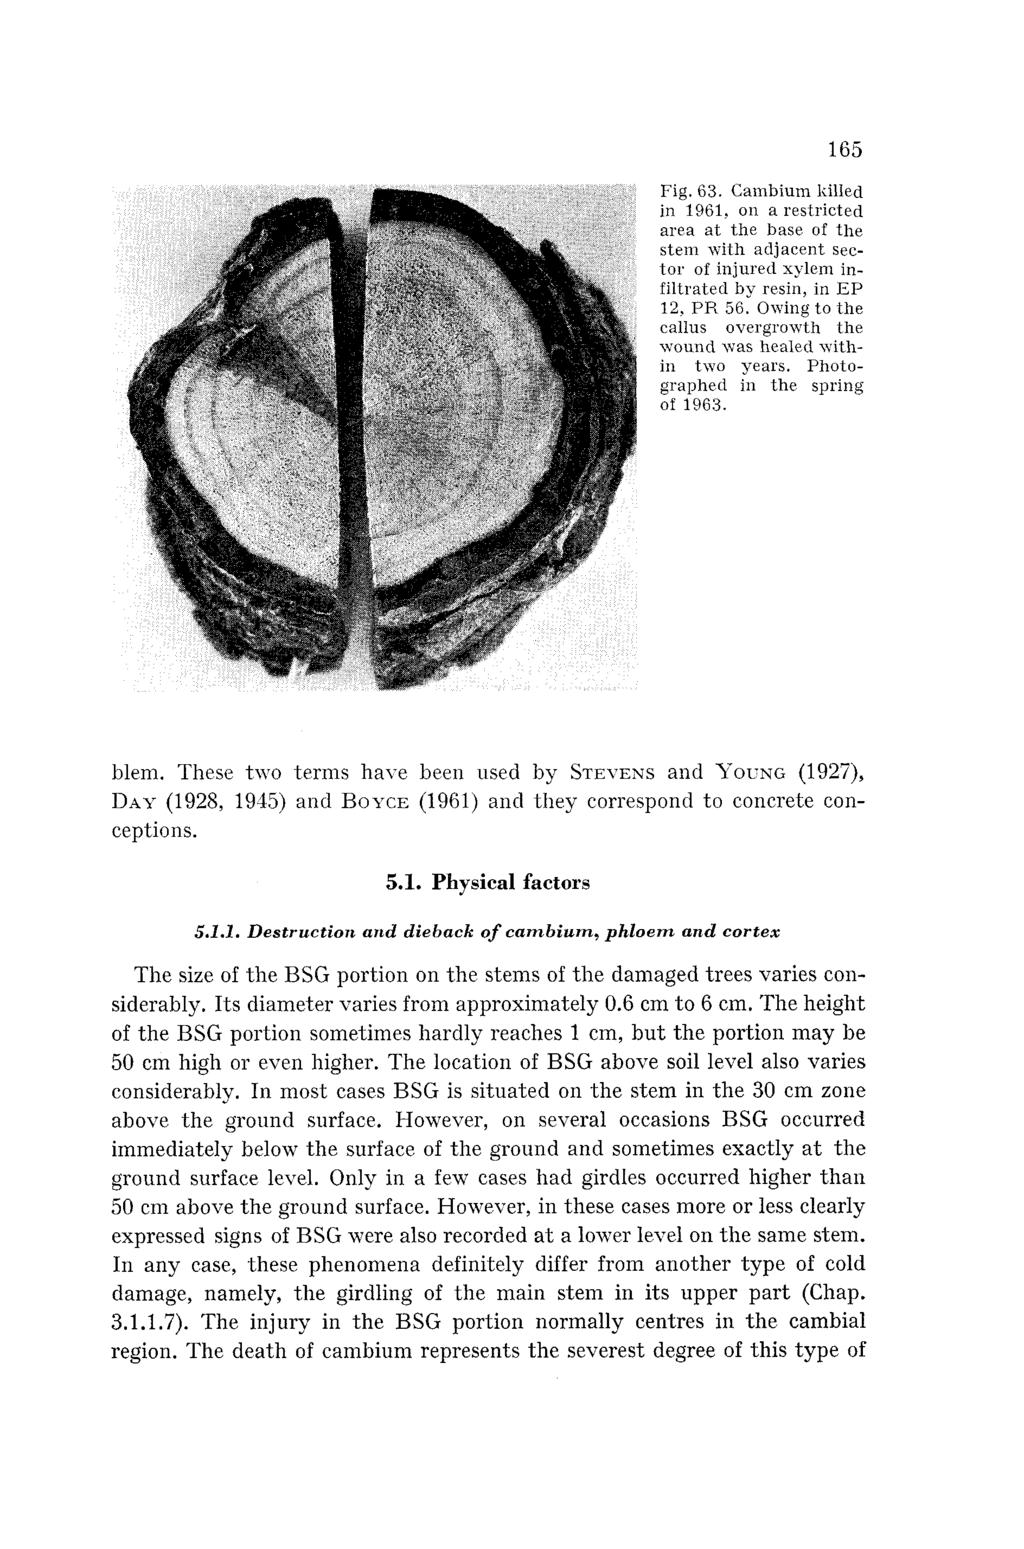 Fig. 63. Cambium killed in 1961, on a restricted area at the base of the stem with adjacent sector of injured xylem infiltrated by resin, in EP 12, PR 56.